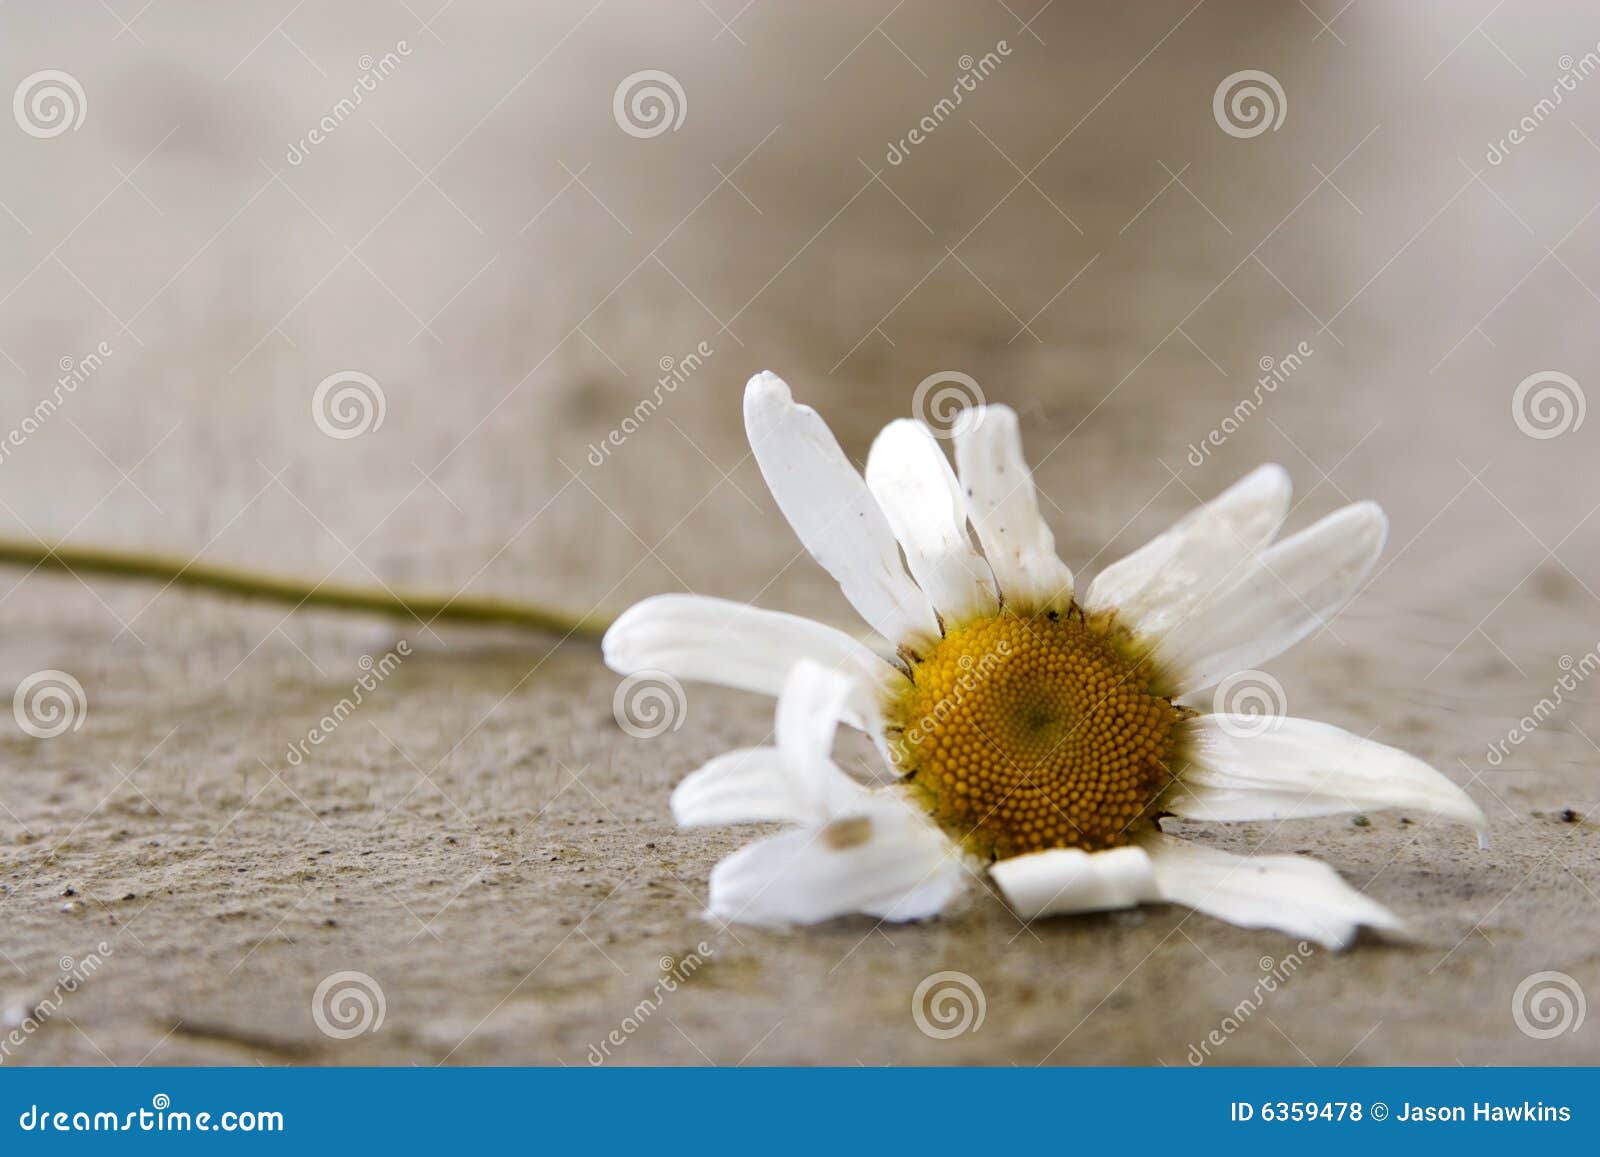 withered daisy